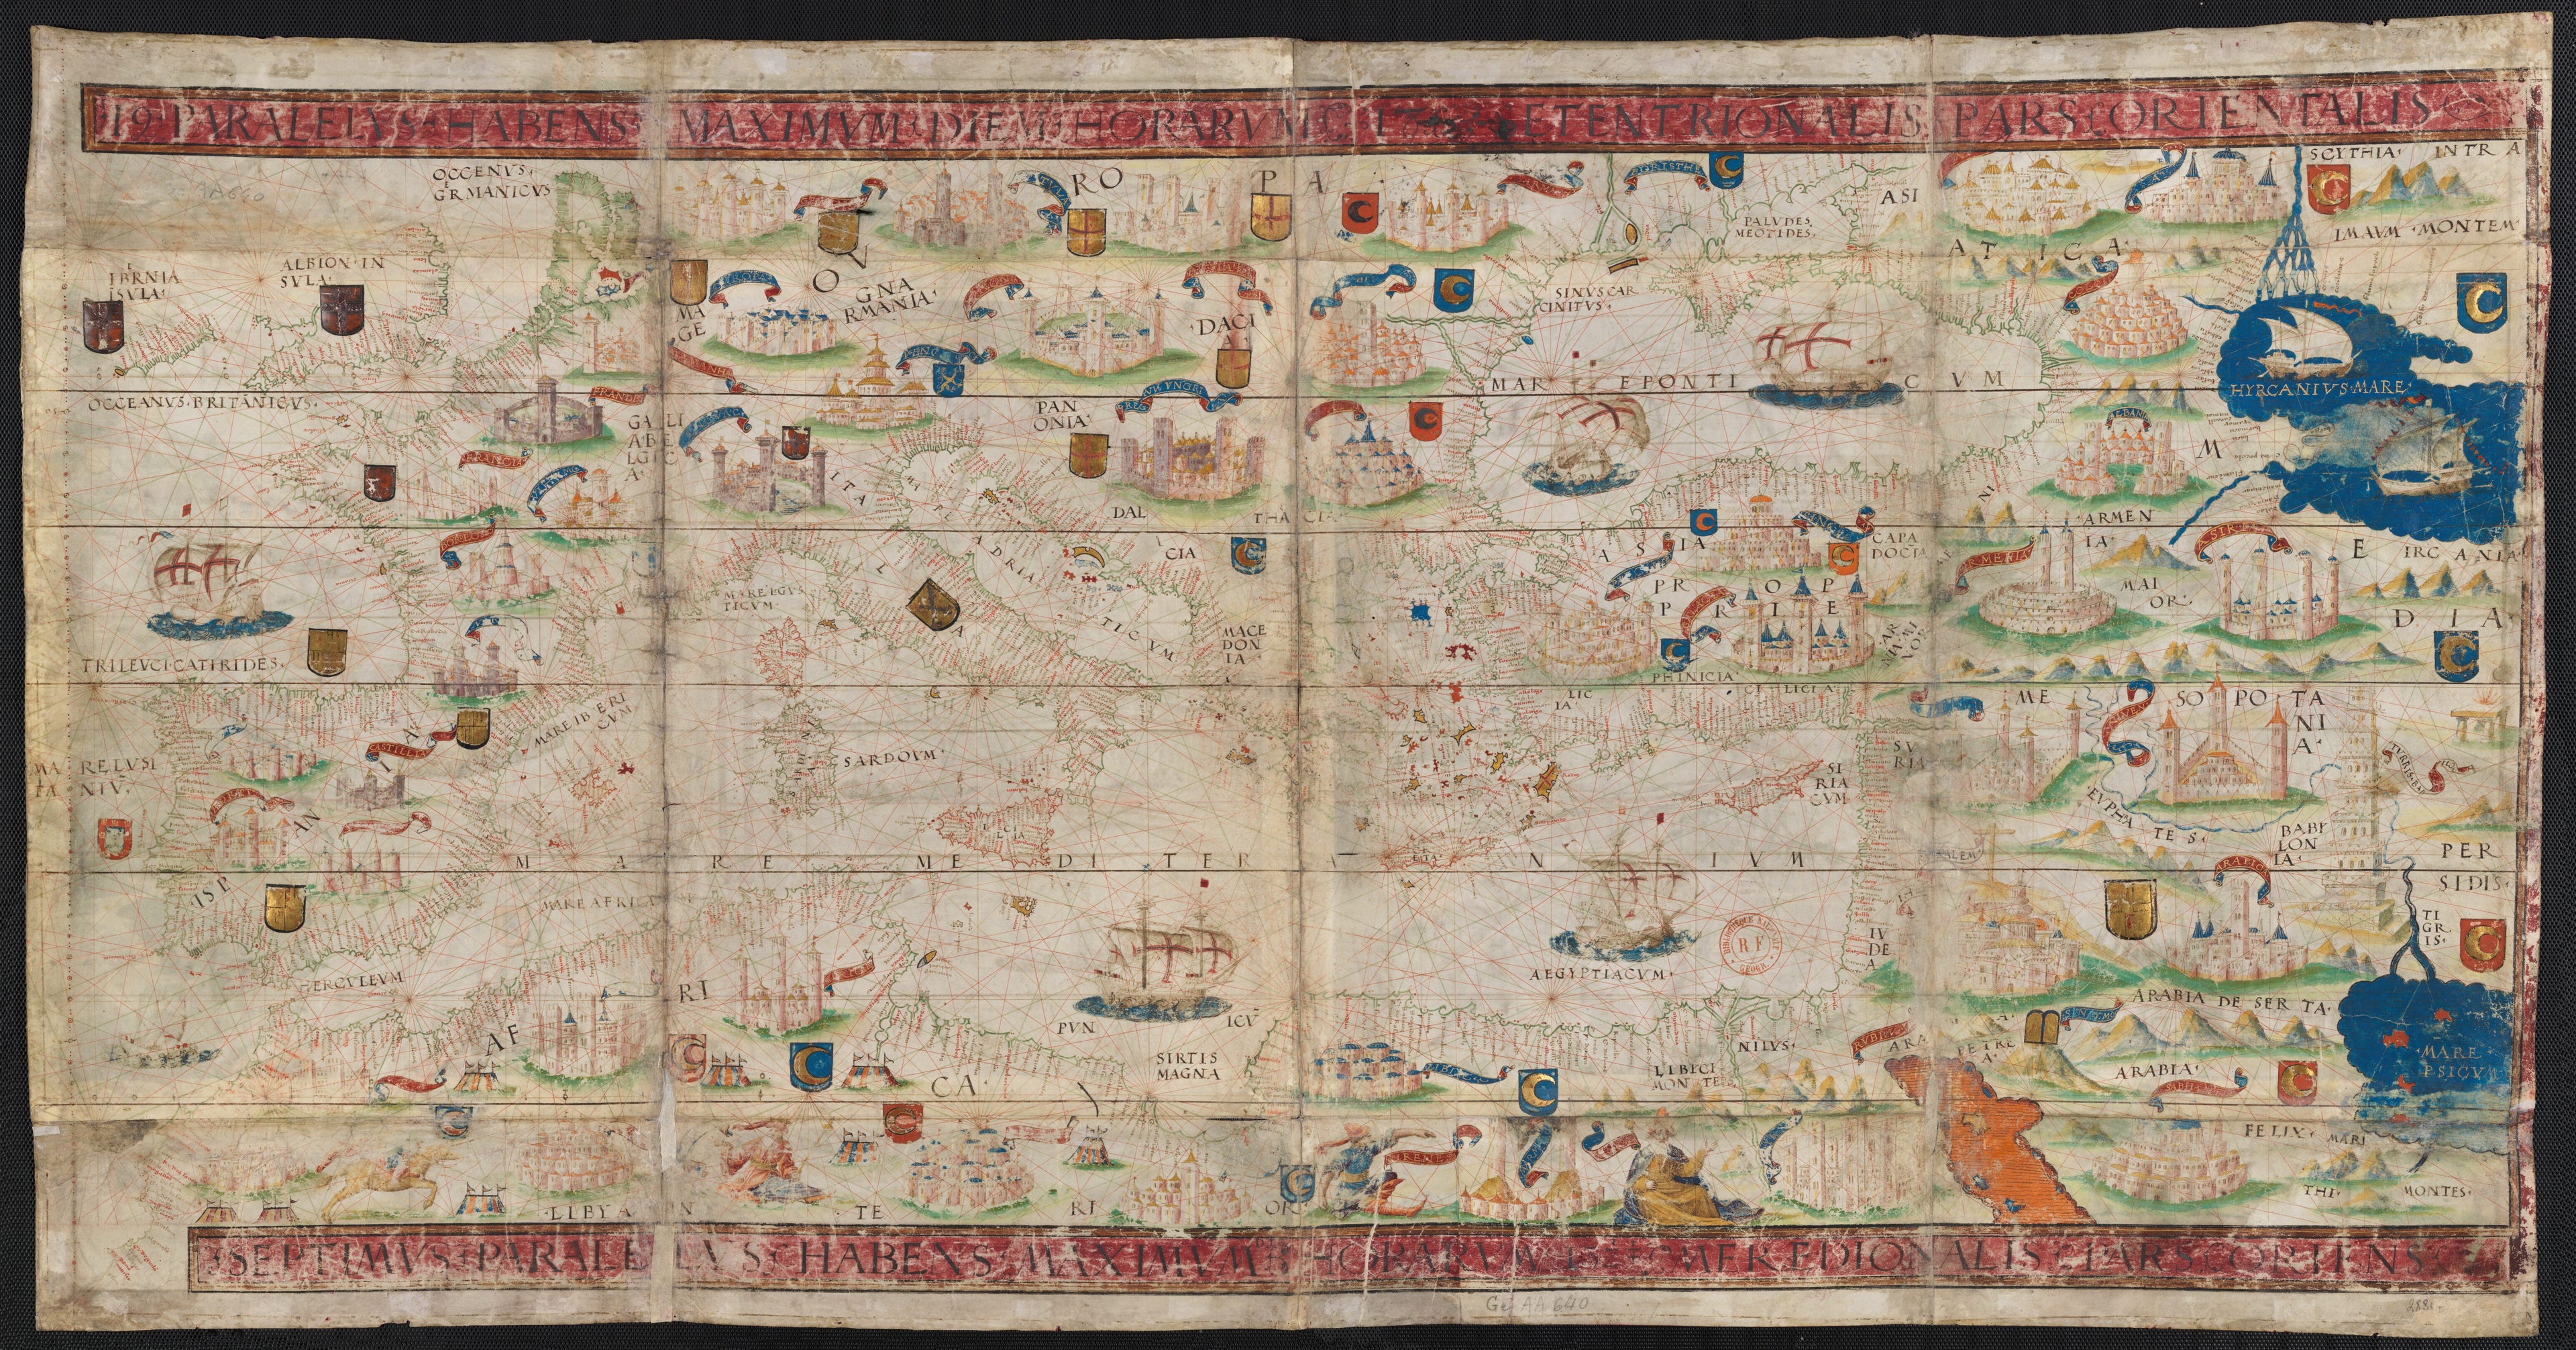 This old map of Nautical Atlas of the World, Folio 6 Verso, the Mediterranean Sea from 1519 was created by António De Holanda, Lopo Homem, King of Portugal Manuel I, Jorge Reinel, Pedro Reinel in 1519